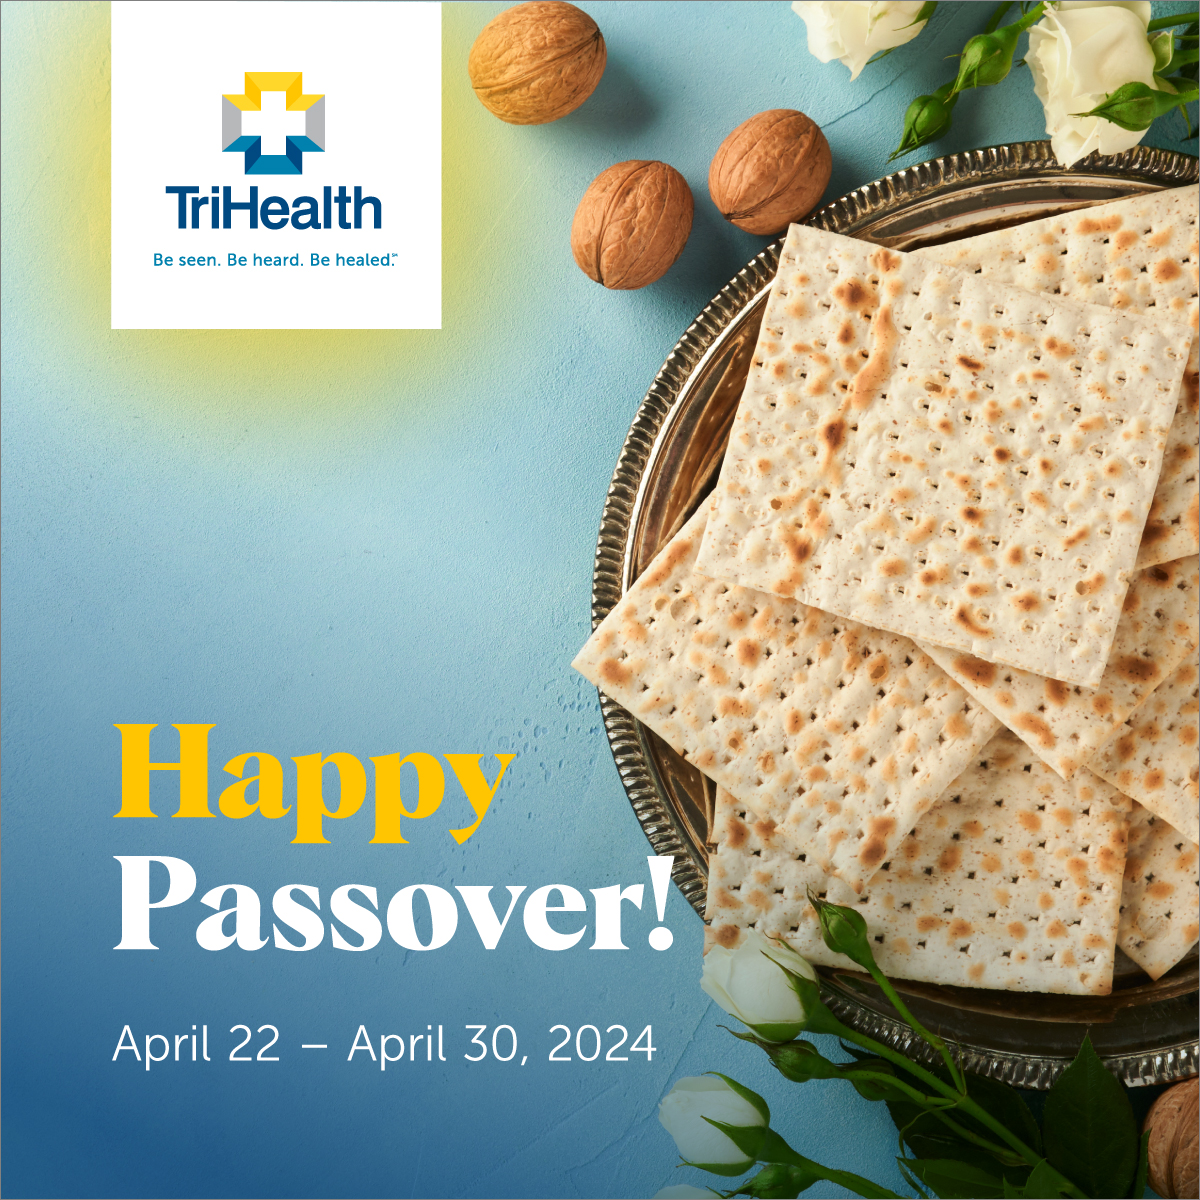 Today marks the beginning of Passover, a seven-day celebration in the Jewish faith that celebrates the freeing of the Israelites from Egypt. At TriHealth, we're proud to celebrate all people and their customs, creating an inclusive environment for our team members and patients!